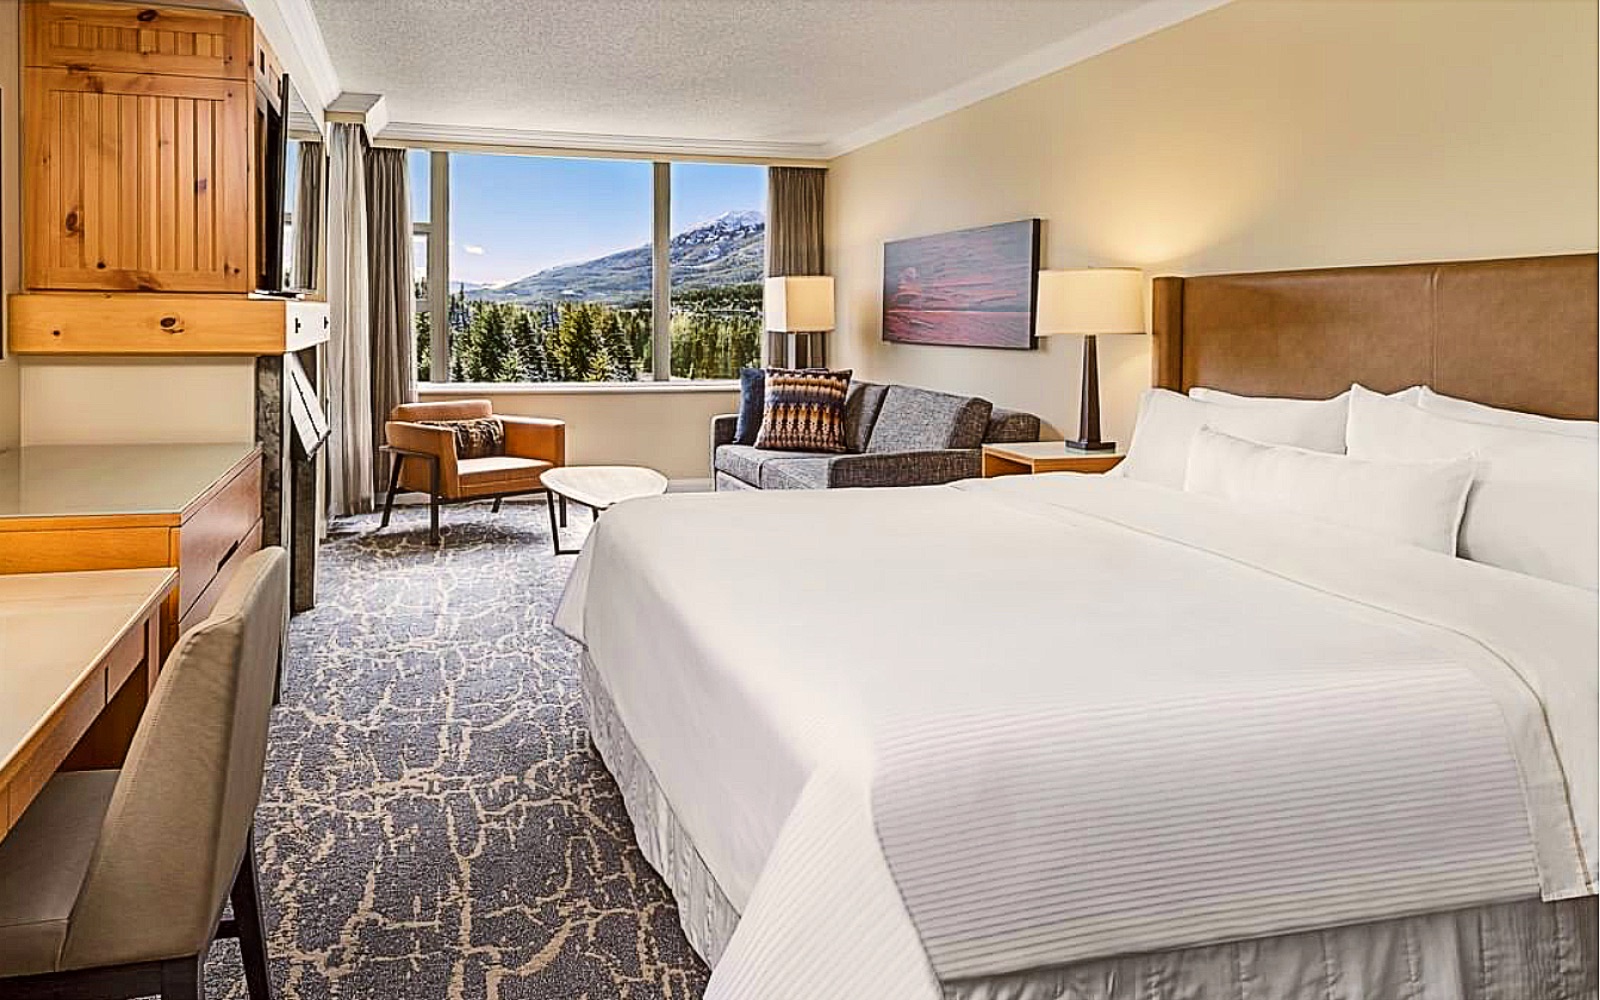 A room at the Westin Resort and Spa, Whistler